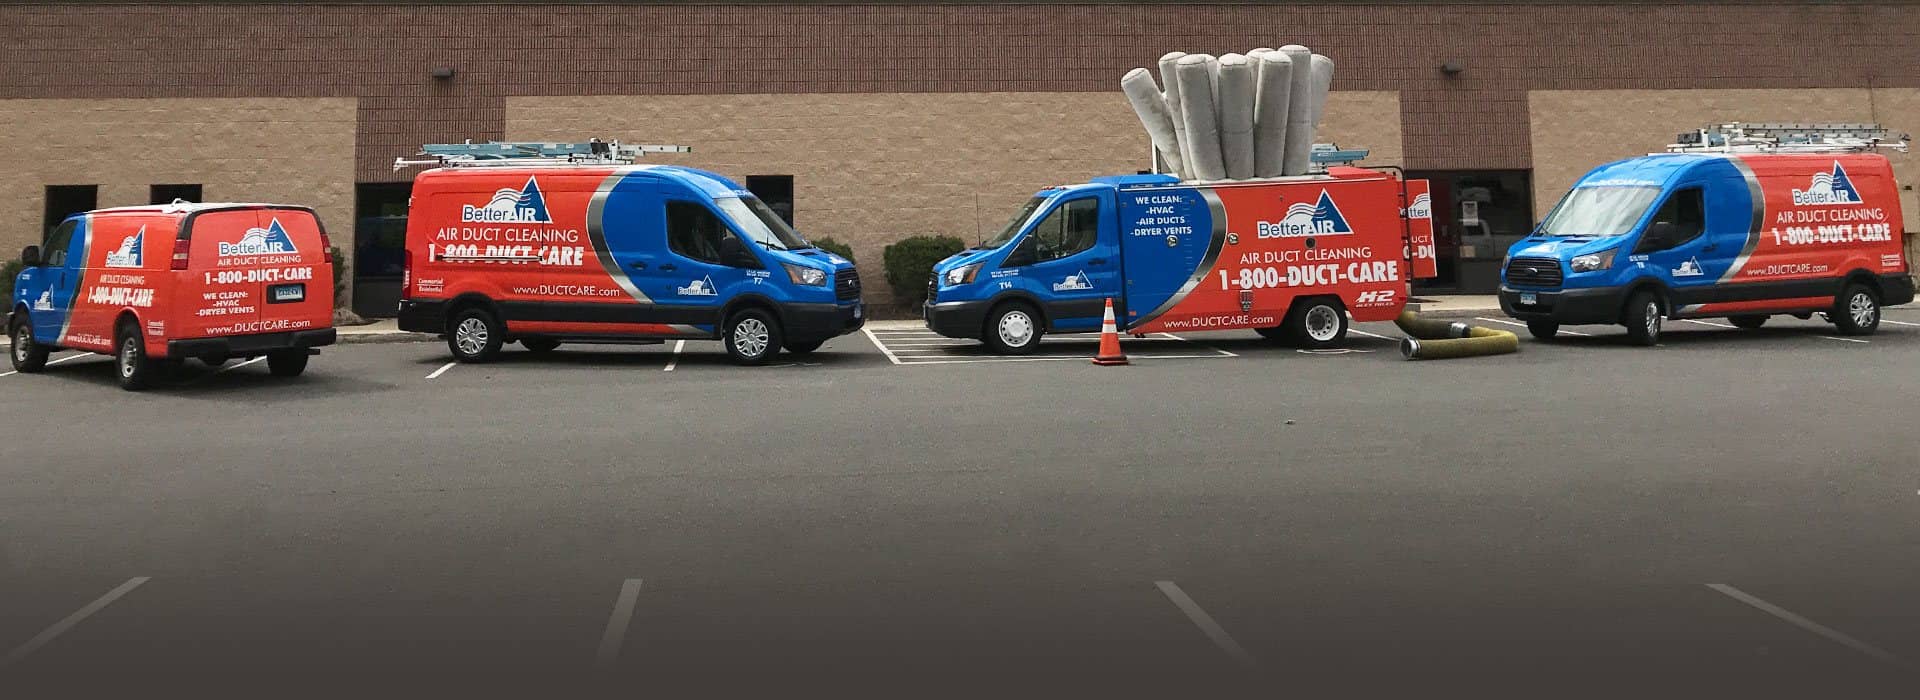 BETTER AIR - COMMERCIAL AIR DUCT CLEANING SERVICES - VANS